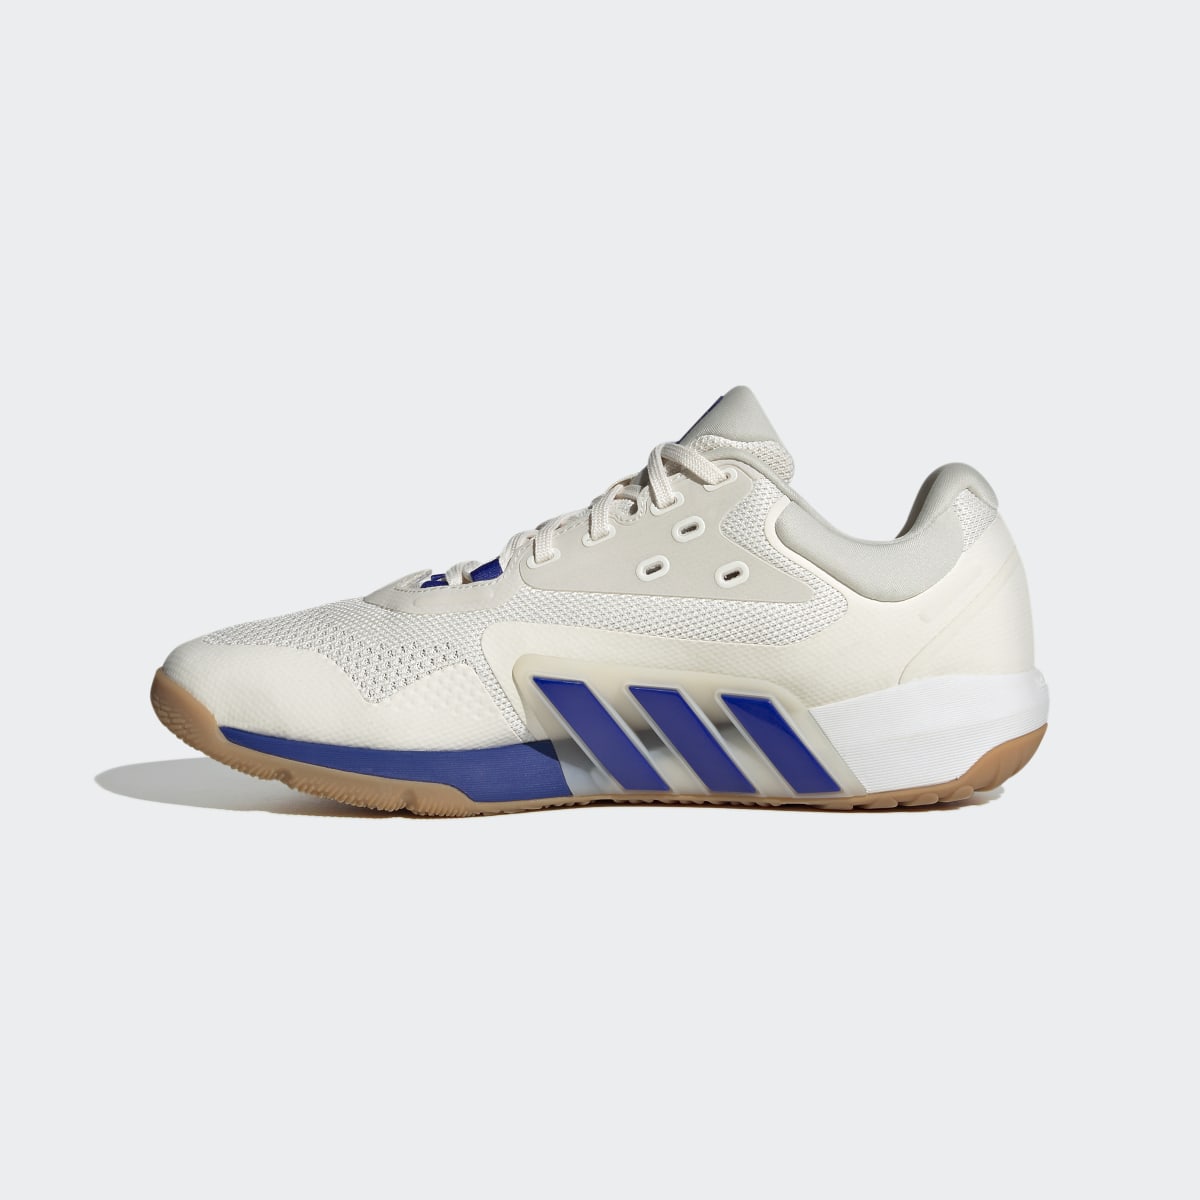 Adidas Dropset Trainer Shoes. 10